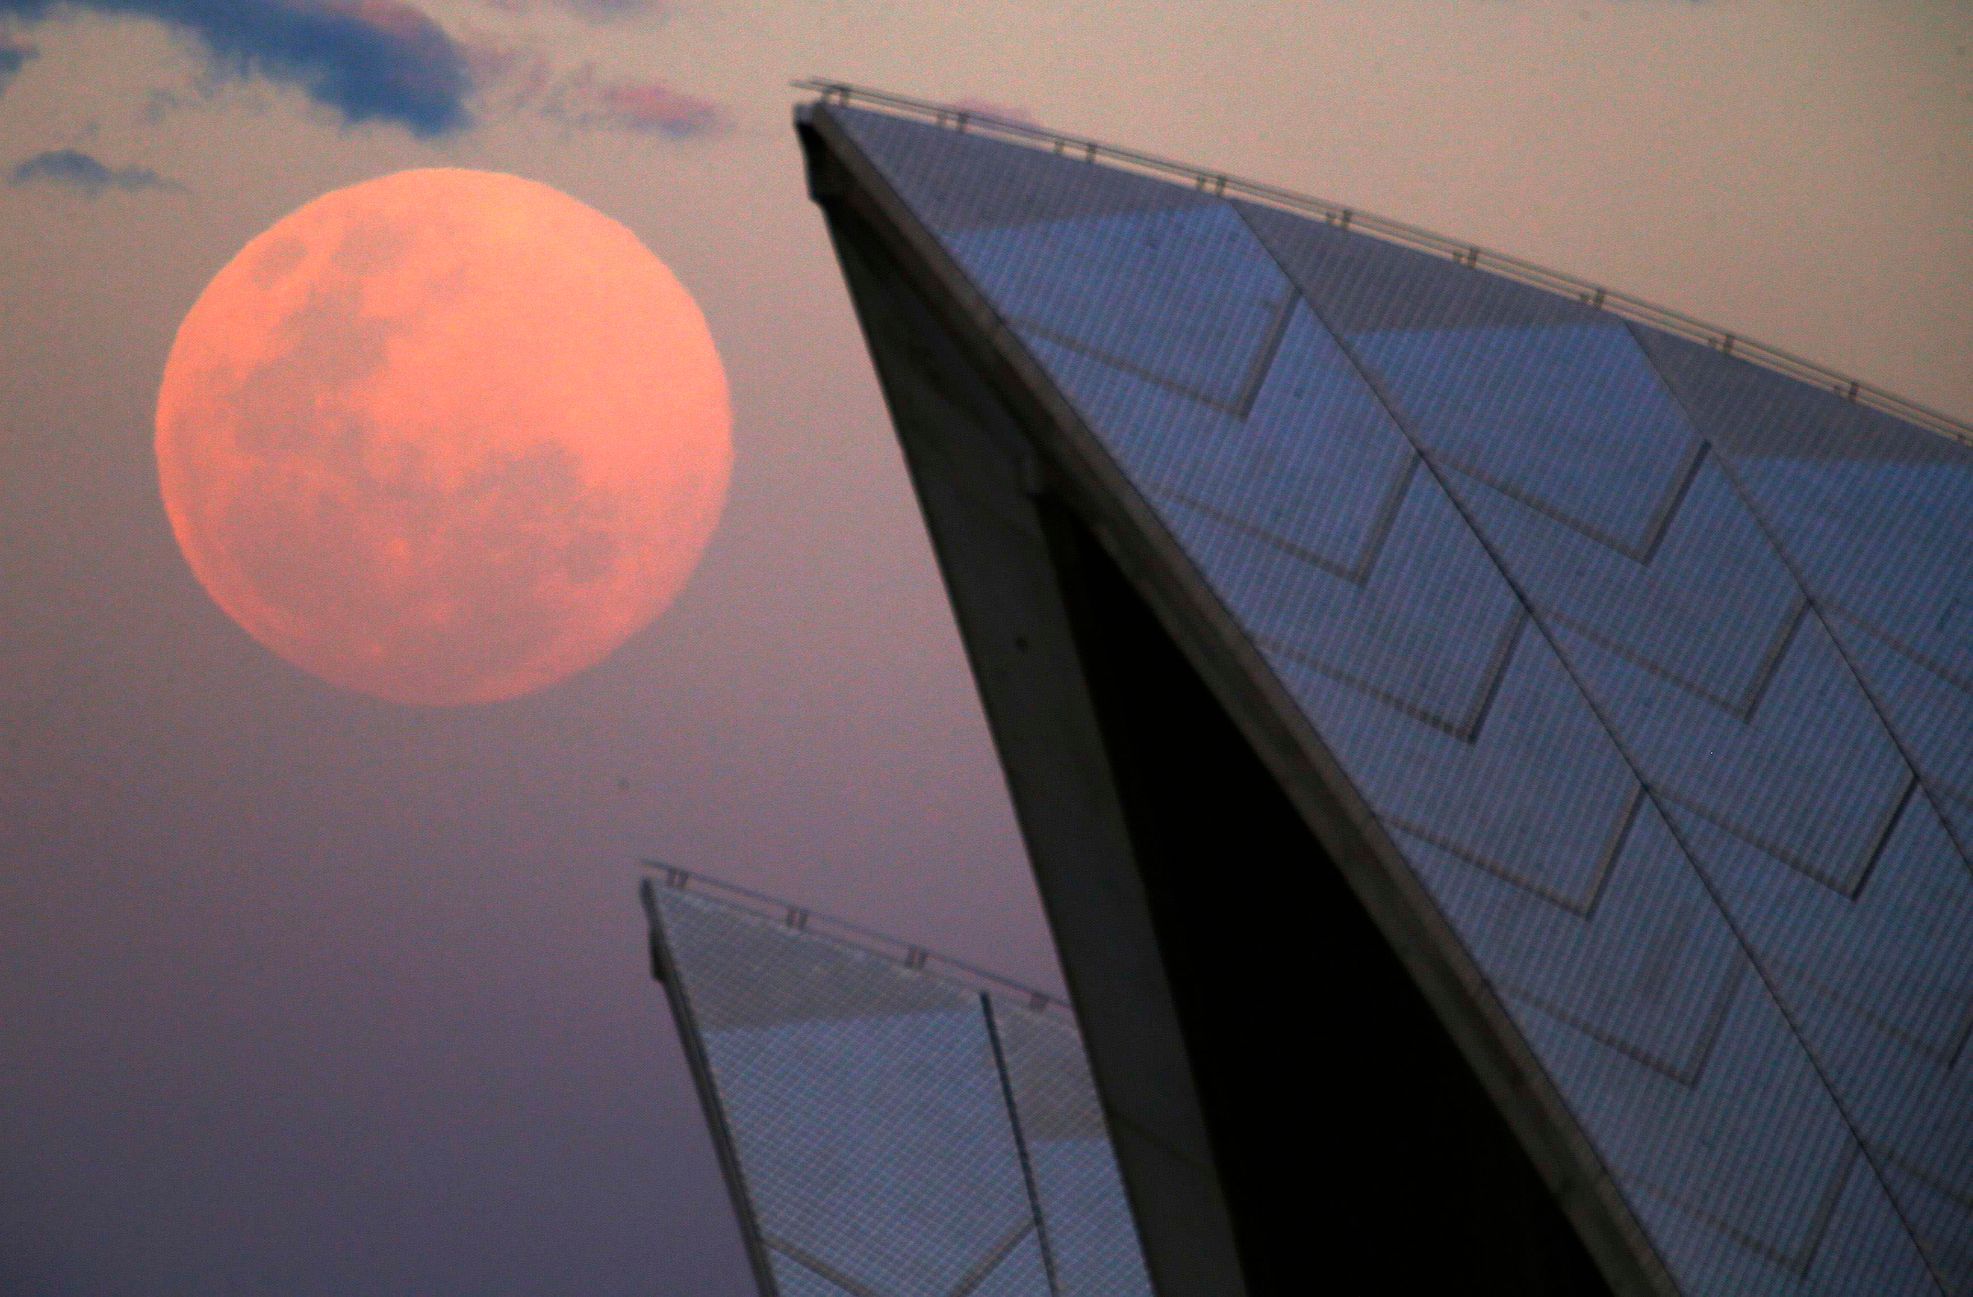 A supermoon rises behind the roof of the Sydney Opera House